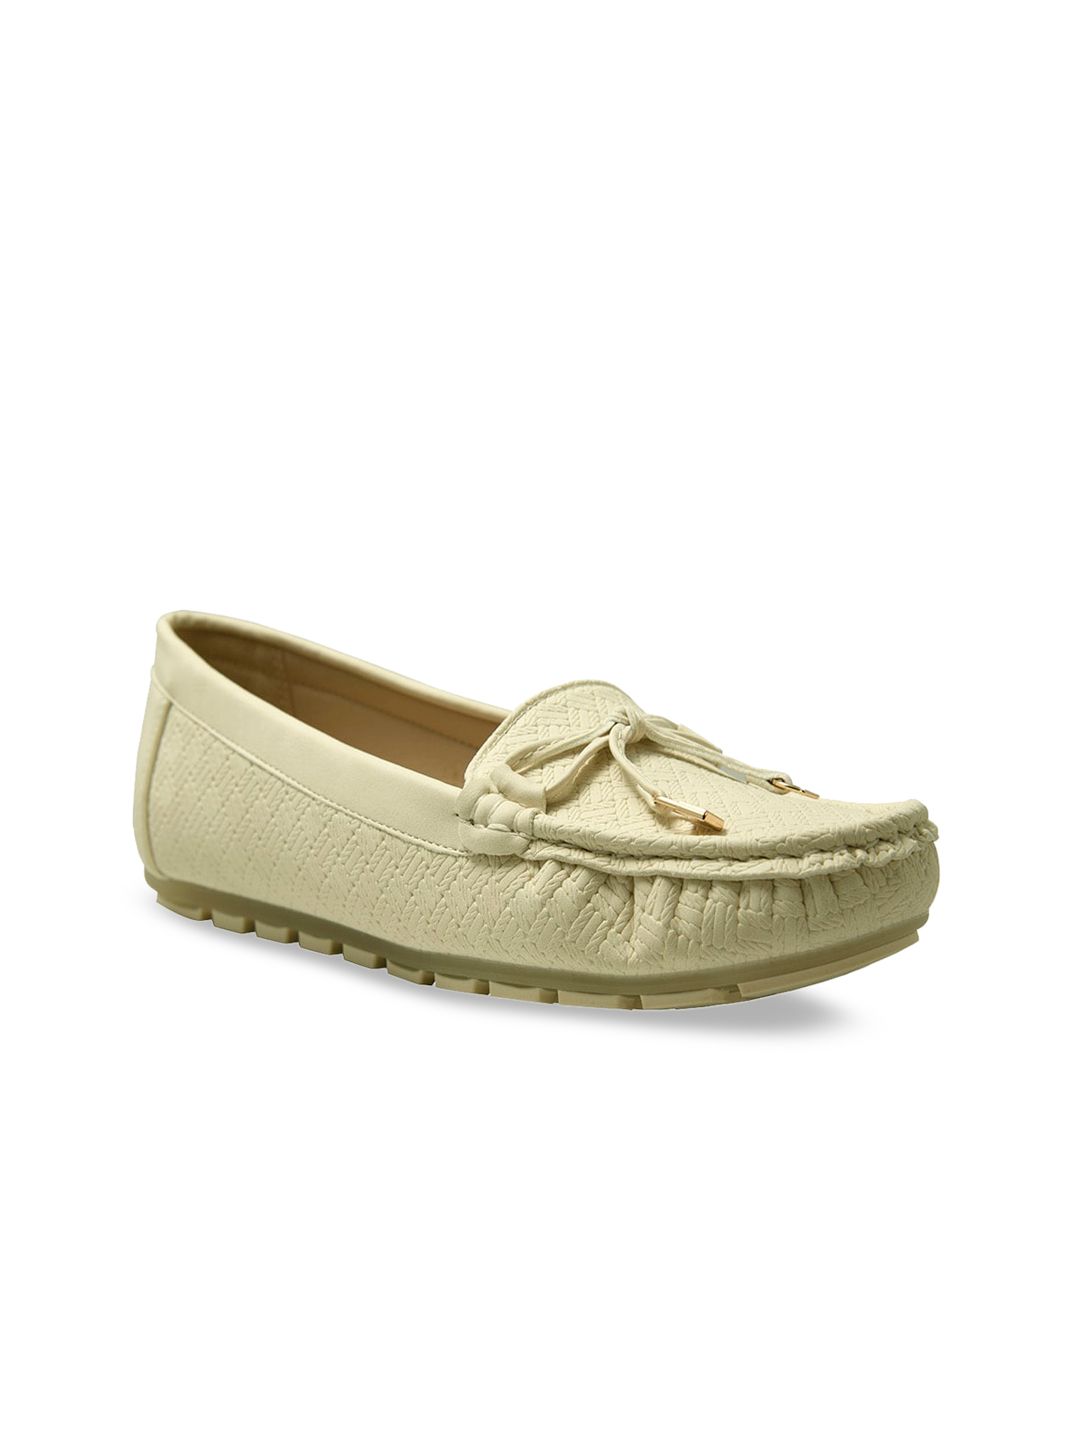 Addons Women Off White Textured PU Loafers Price in India